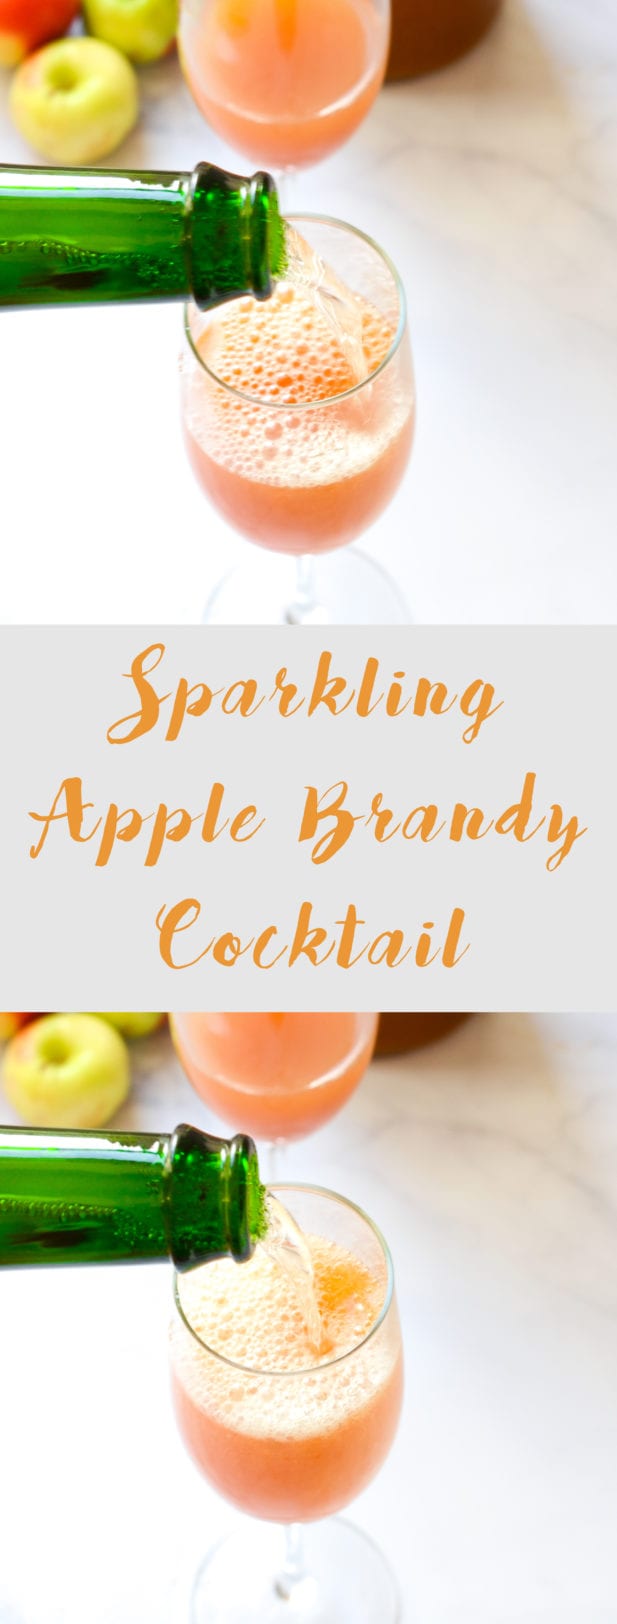 This Sparkling Apple Brandy Cocktail is the perfect soul-warming night cap for chilly fall evenings.